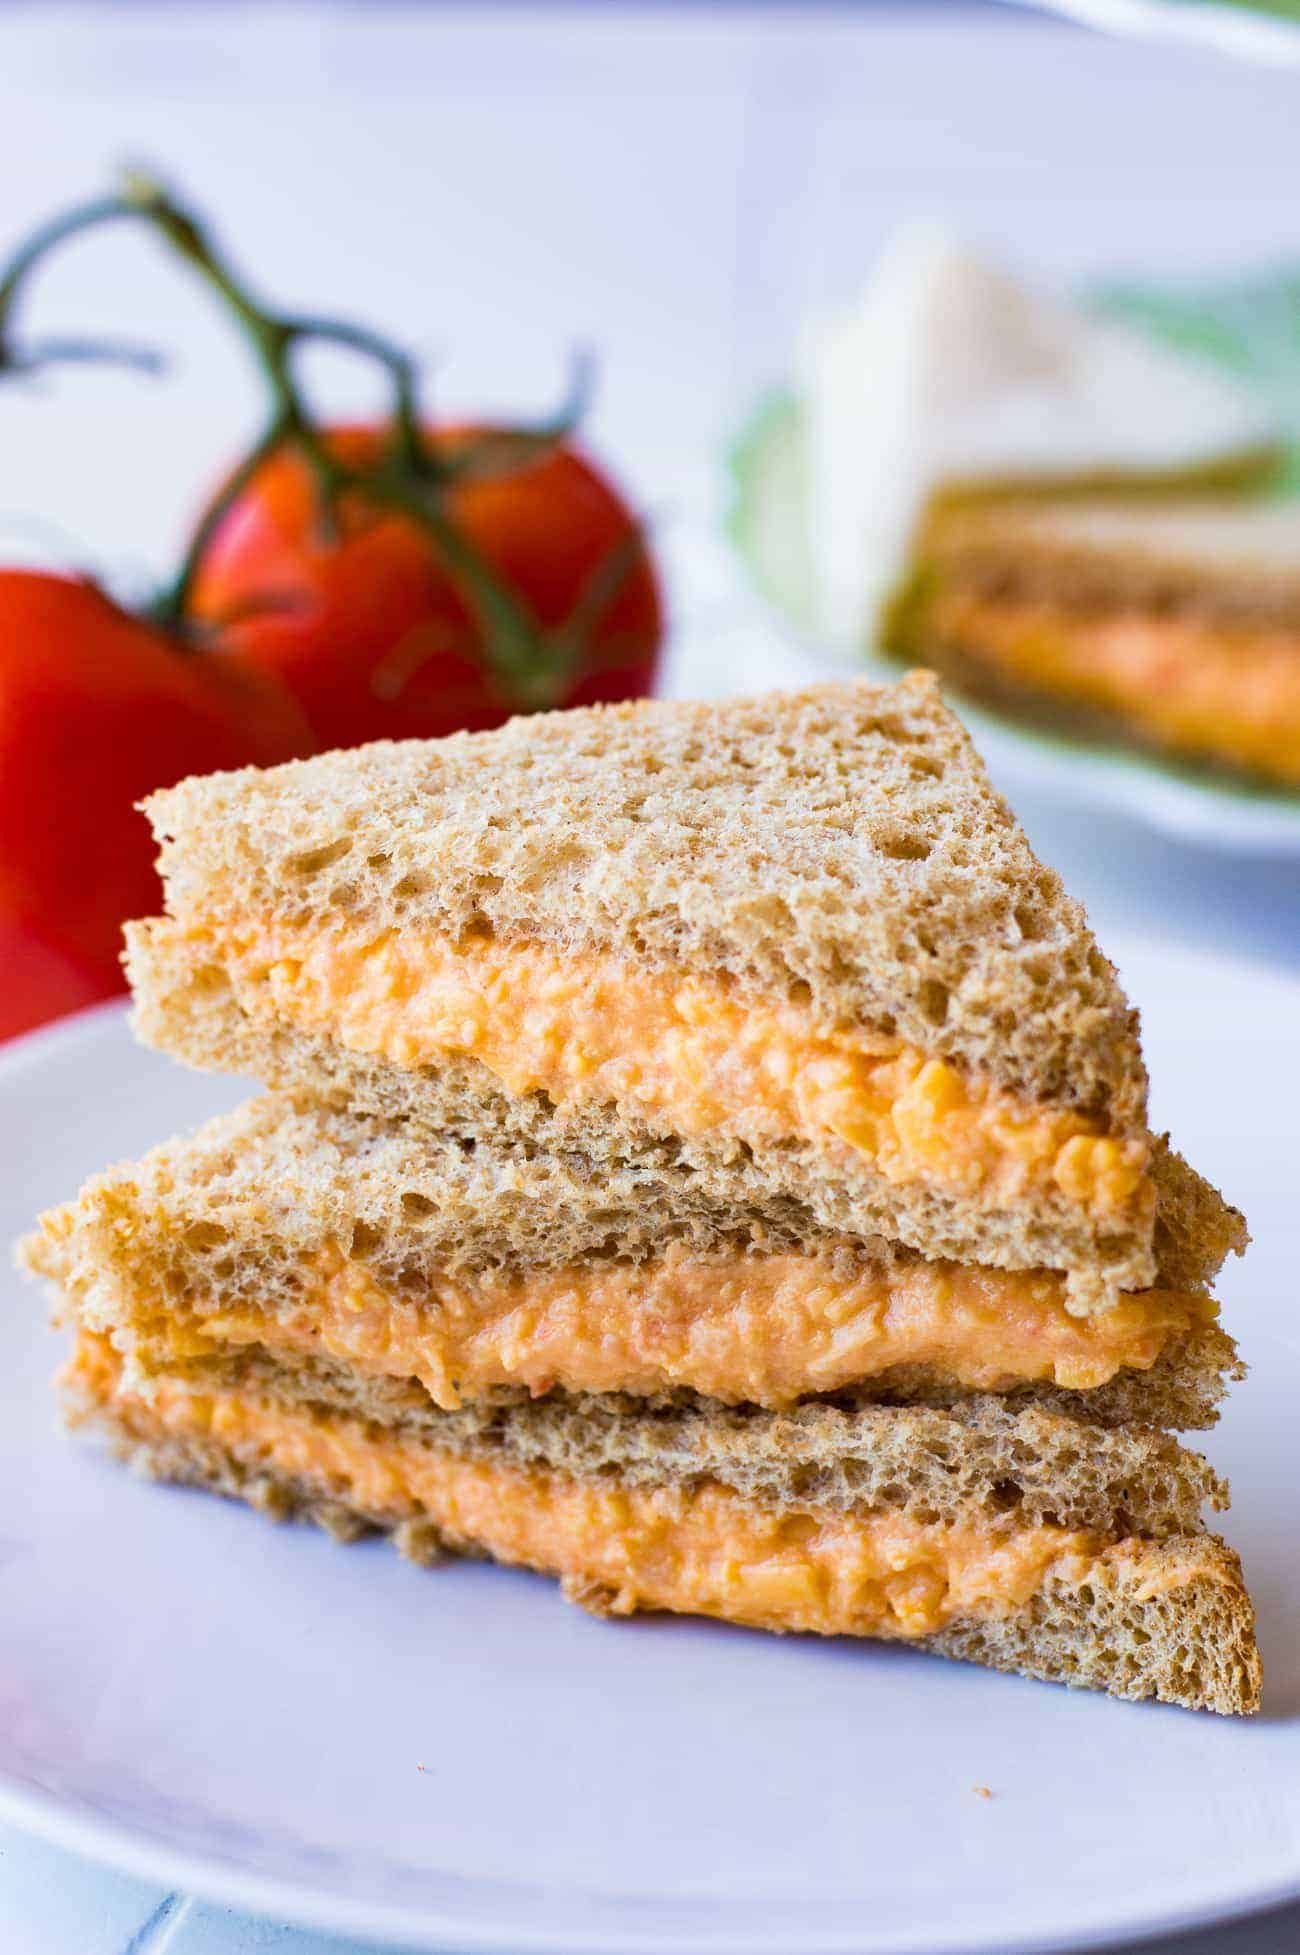 This Tomato Twiddle recipe is perfect as a tea party sandwich. Easy to make, only 3 ingredients, and so flavorful! Get ready to meet your new favorite sandwich!